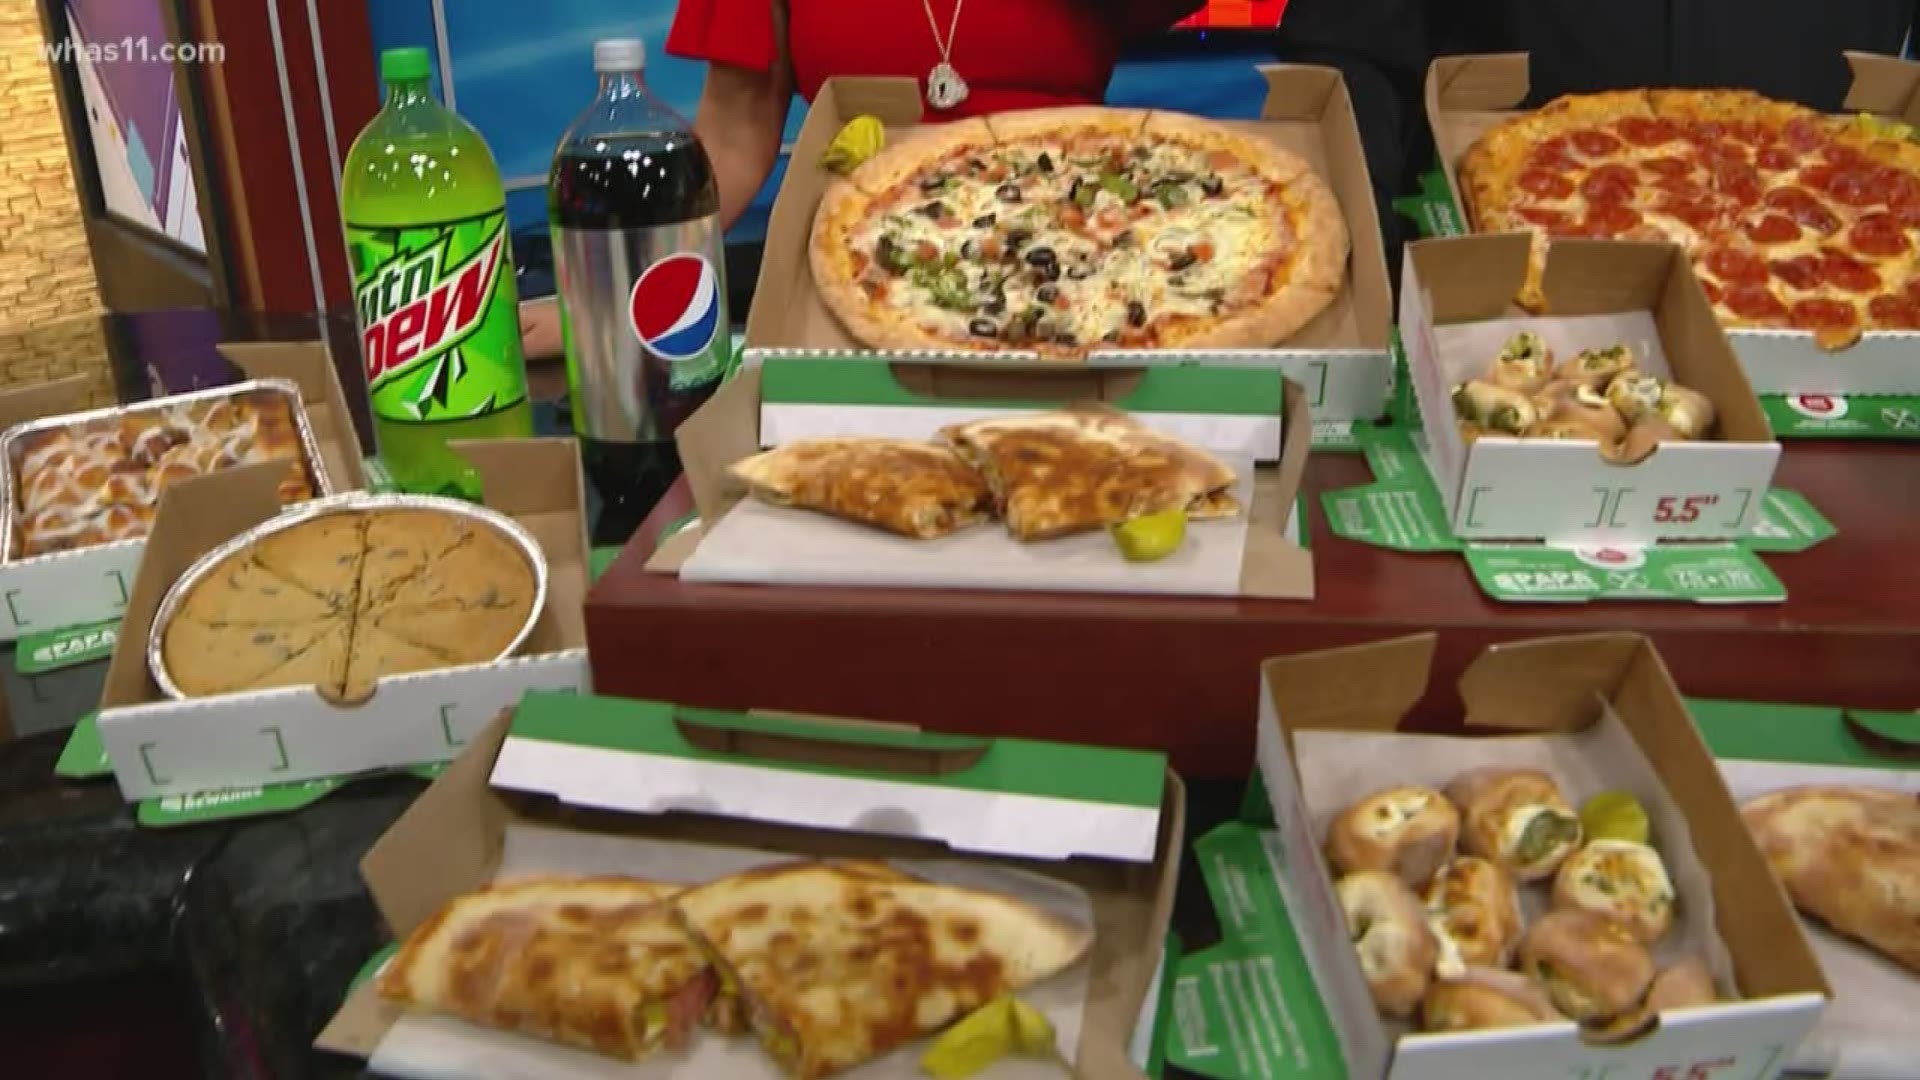 The jalapeno popper rolls are out now, to learn more or place your order, just go to PapaJohns.com. This segment was sponsored by Papa John's.